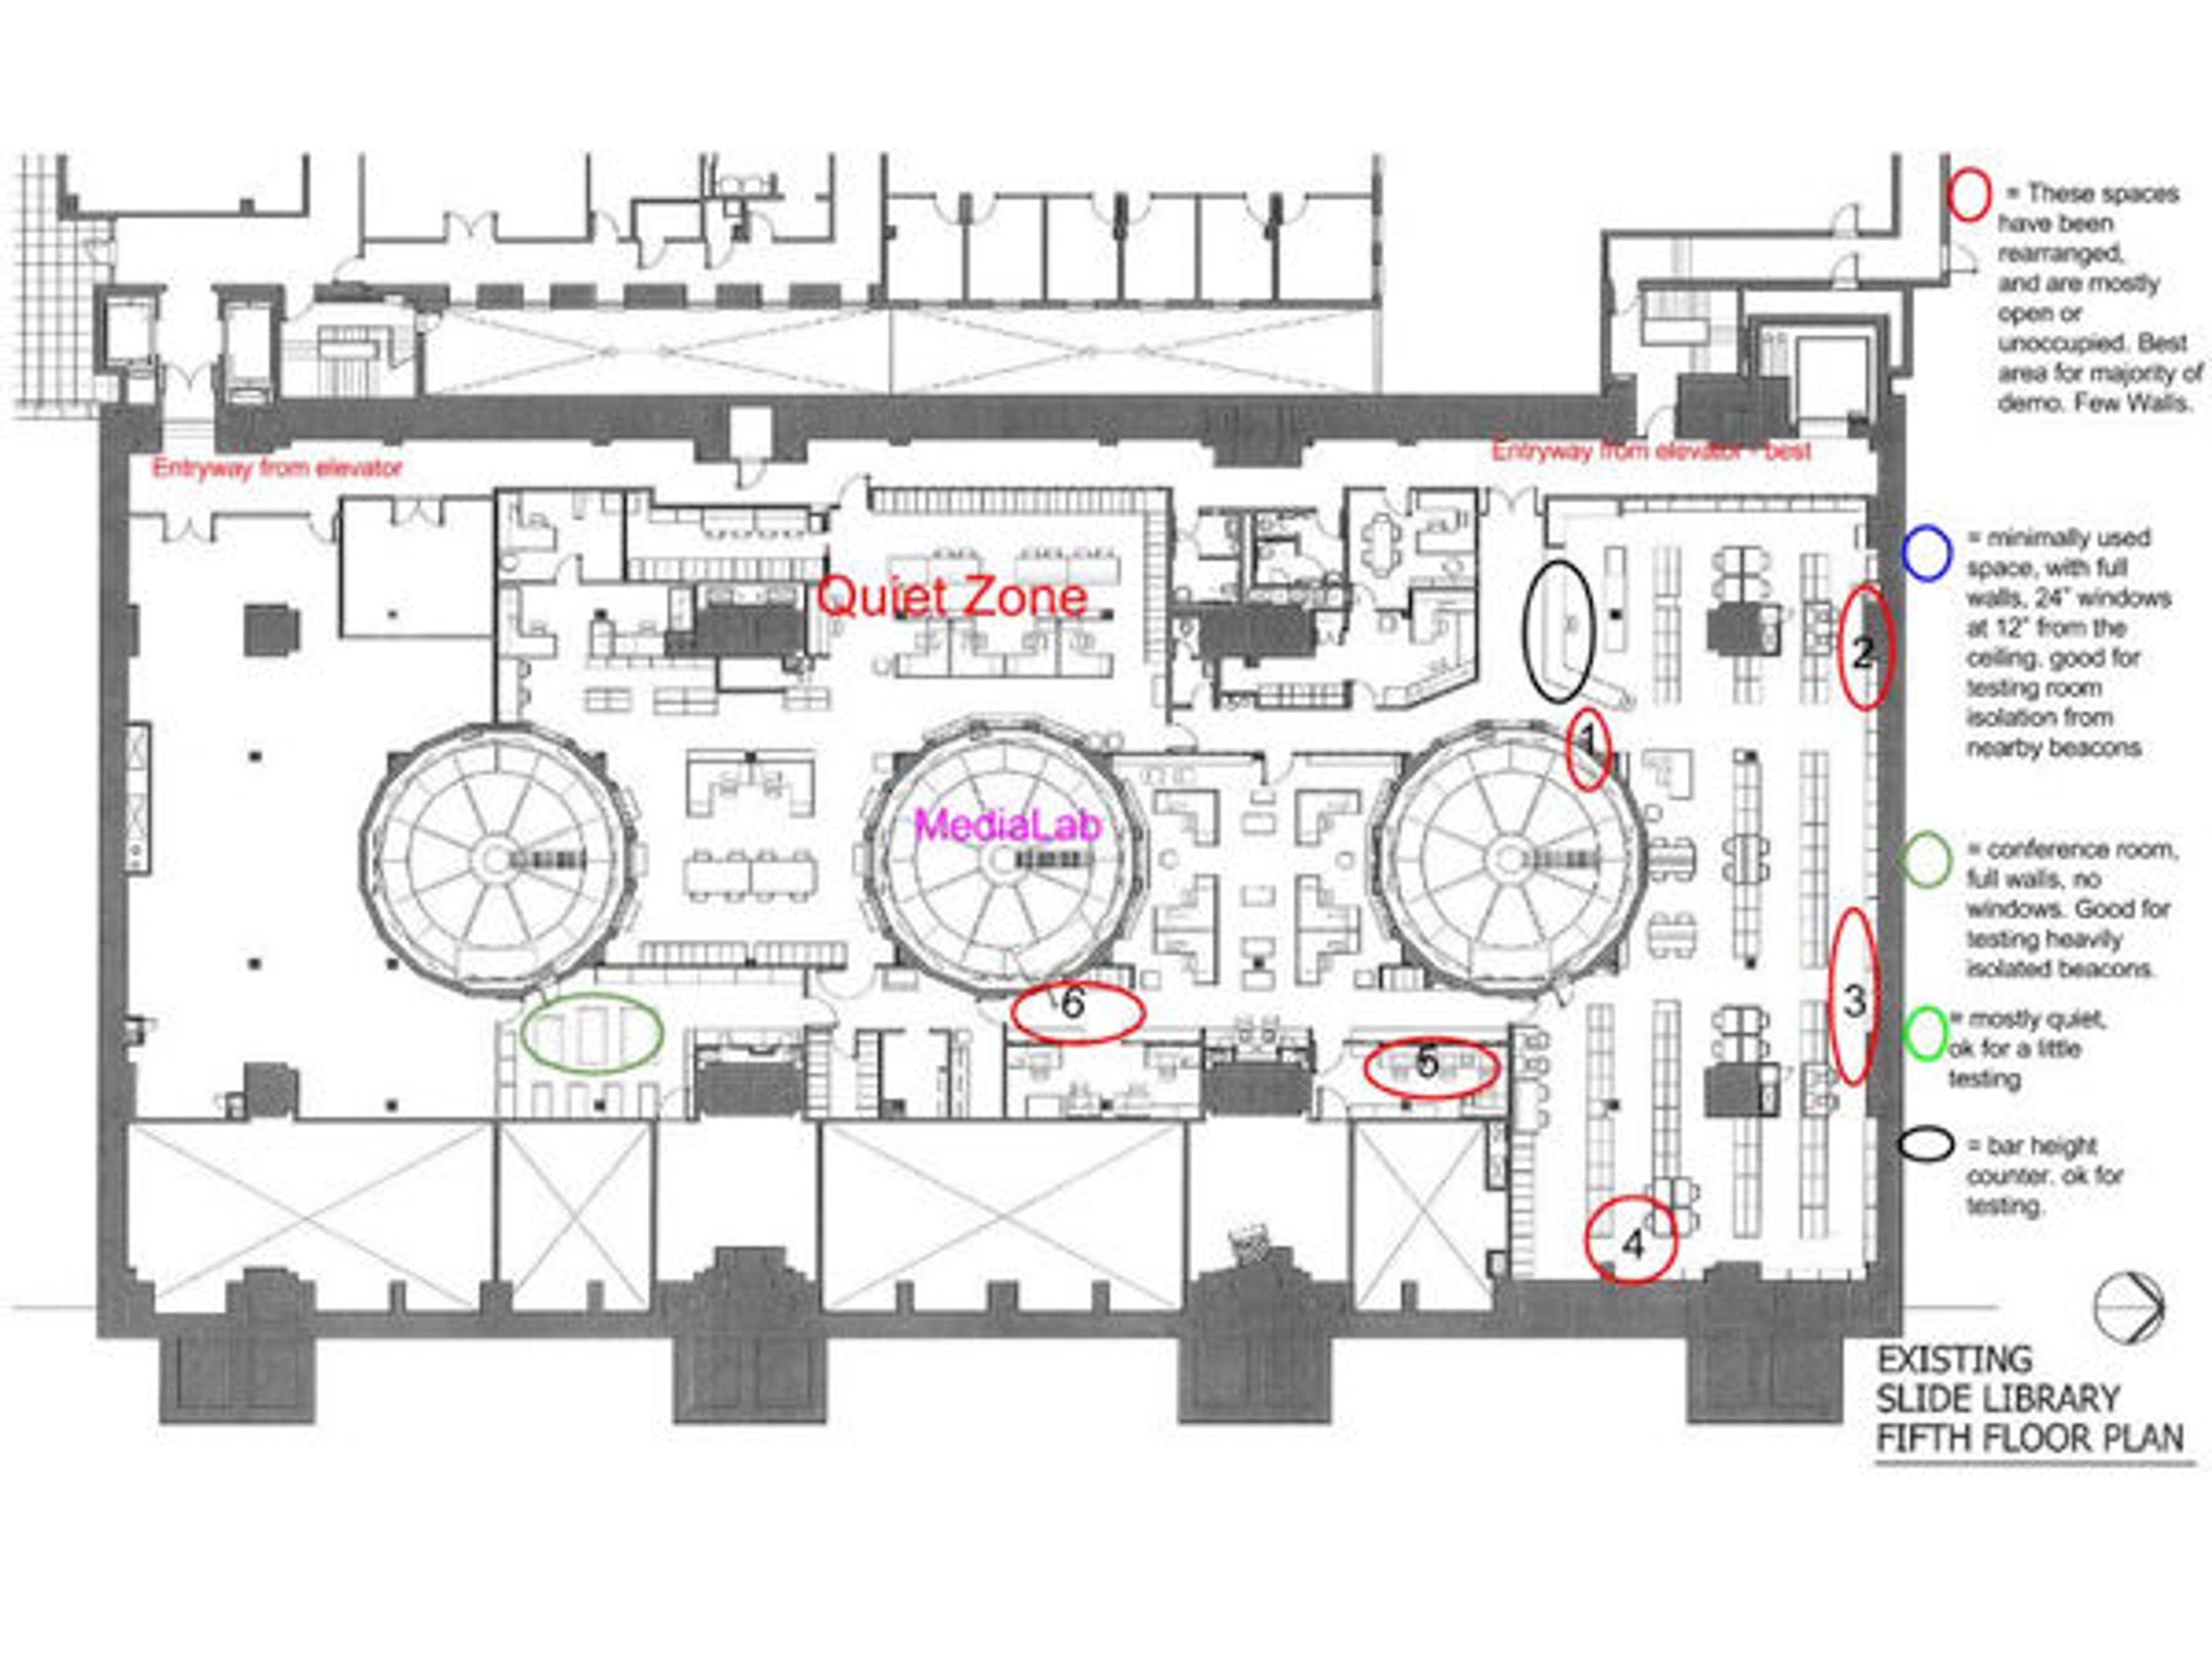 Fig. 4. To test potential in the Museum's galleries, three types of spaces were selected: corridors (1,6); a large, open space (3,4); and a small room (5).